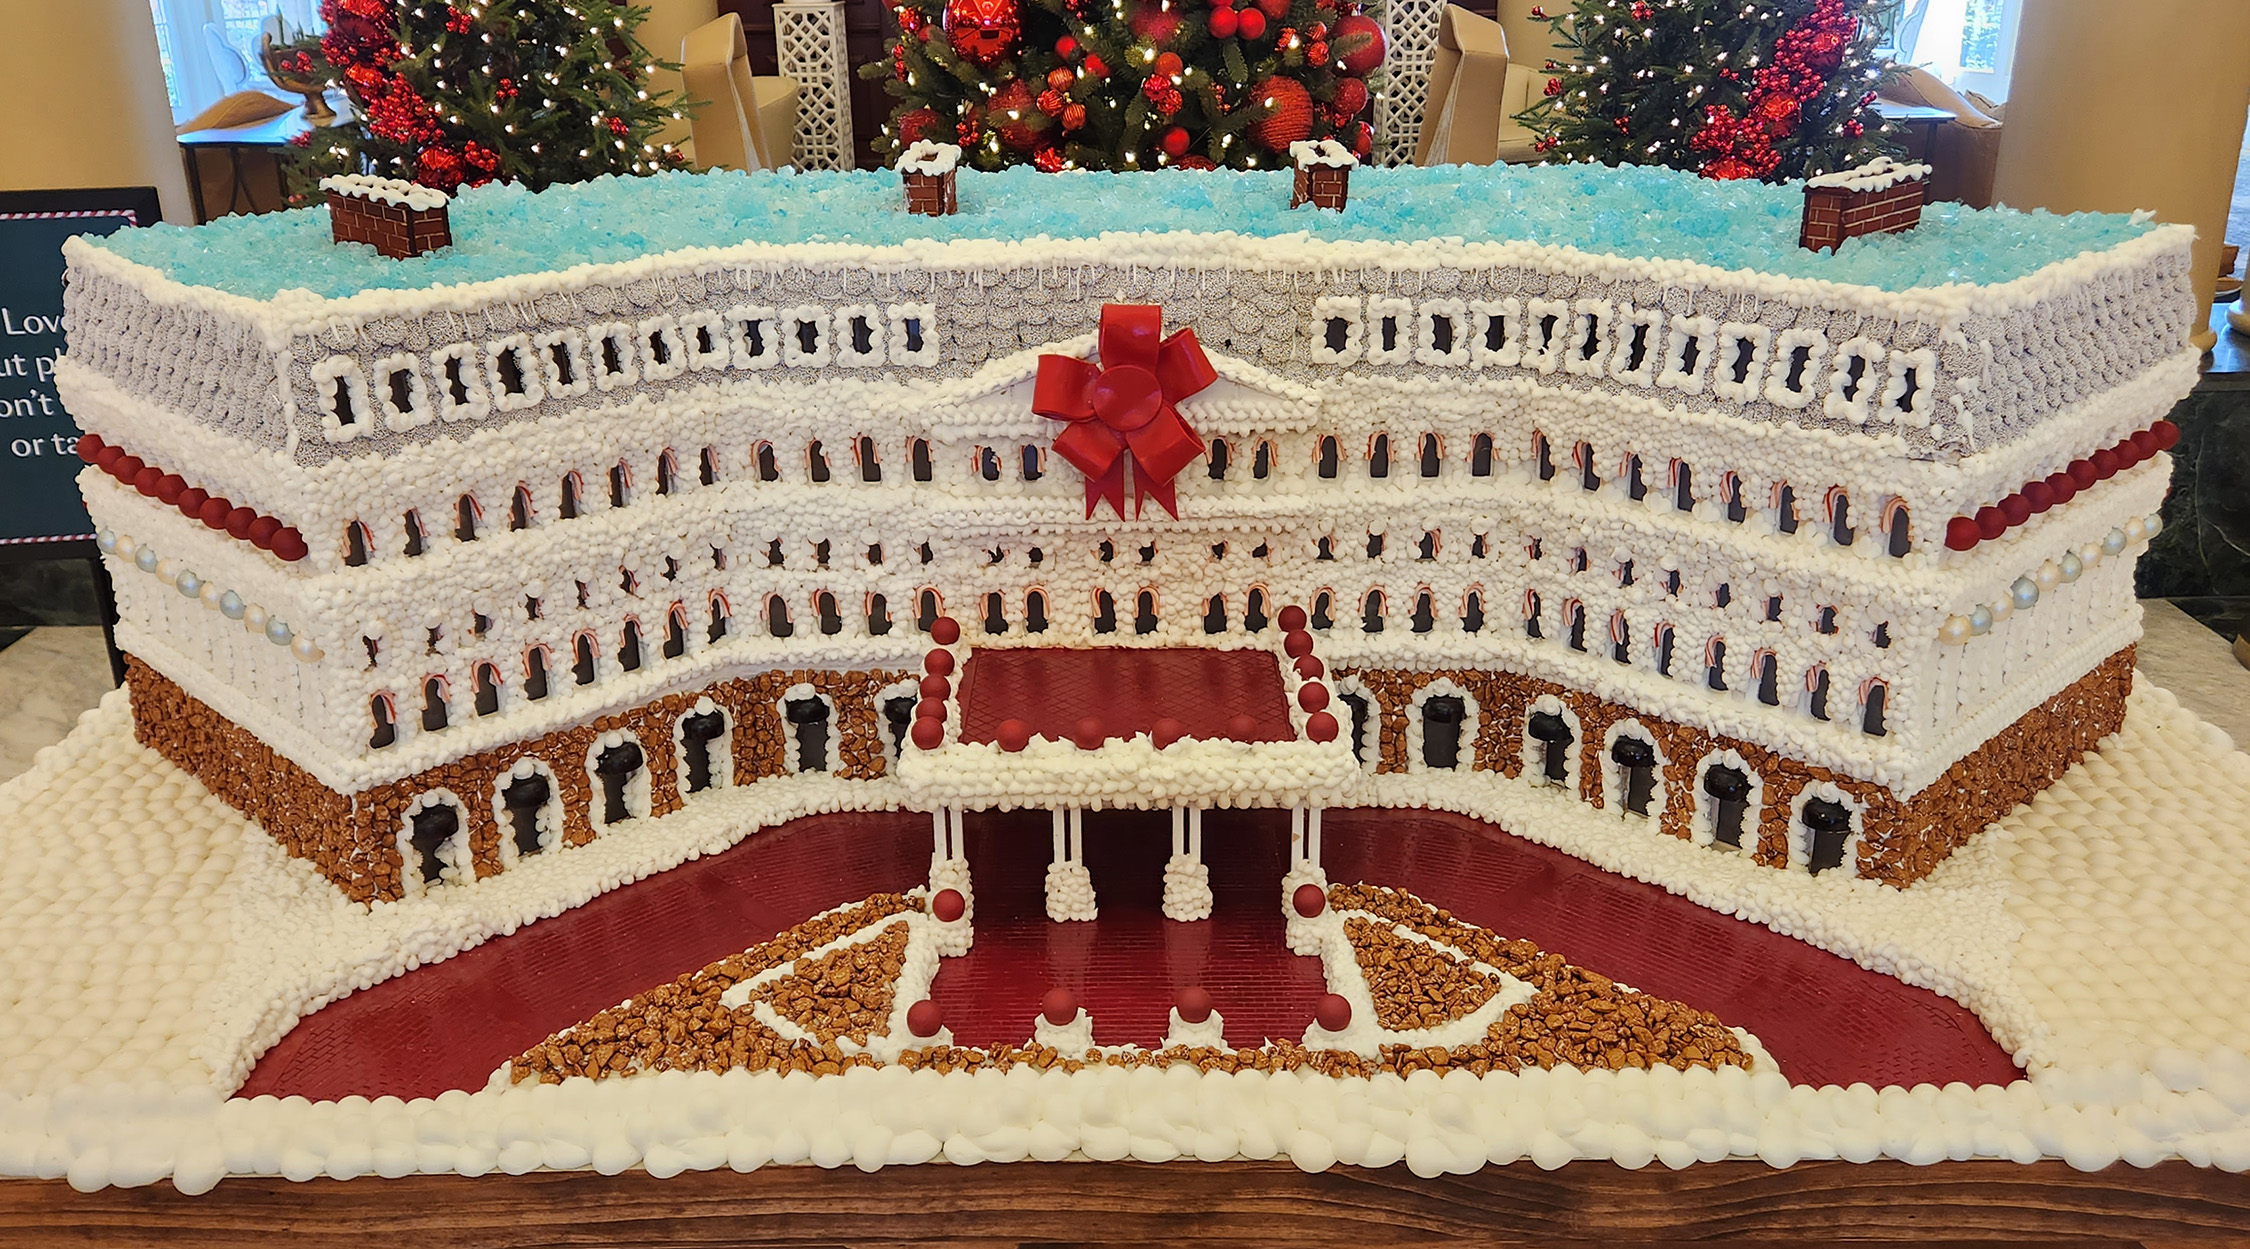 The Chateau gingerbread house display